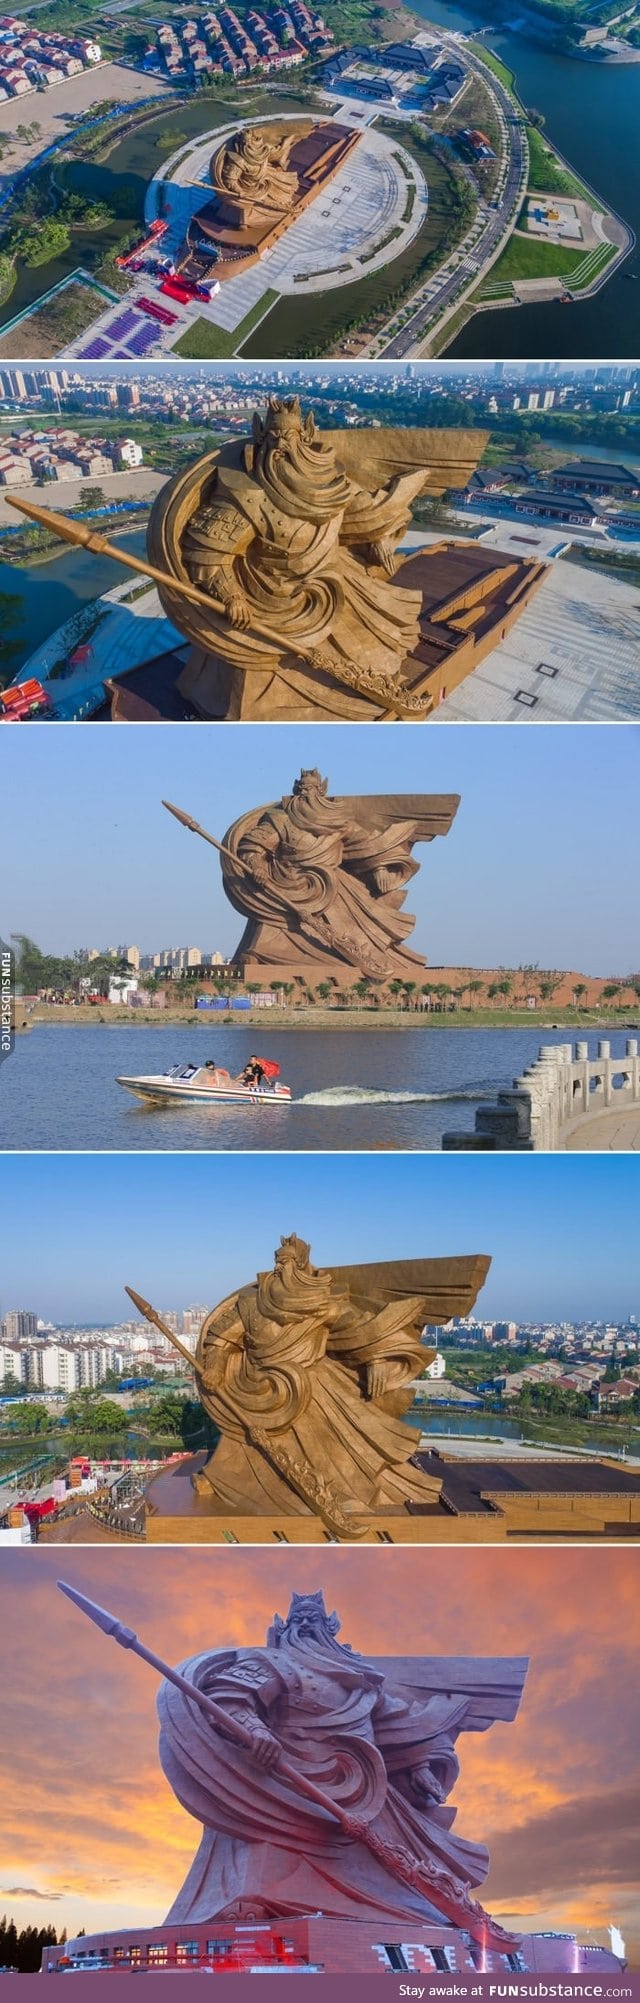 China unveils colossal 1,320-ton sculpture of Chinese God of War "Guan Yu"